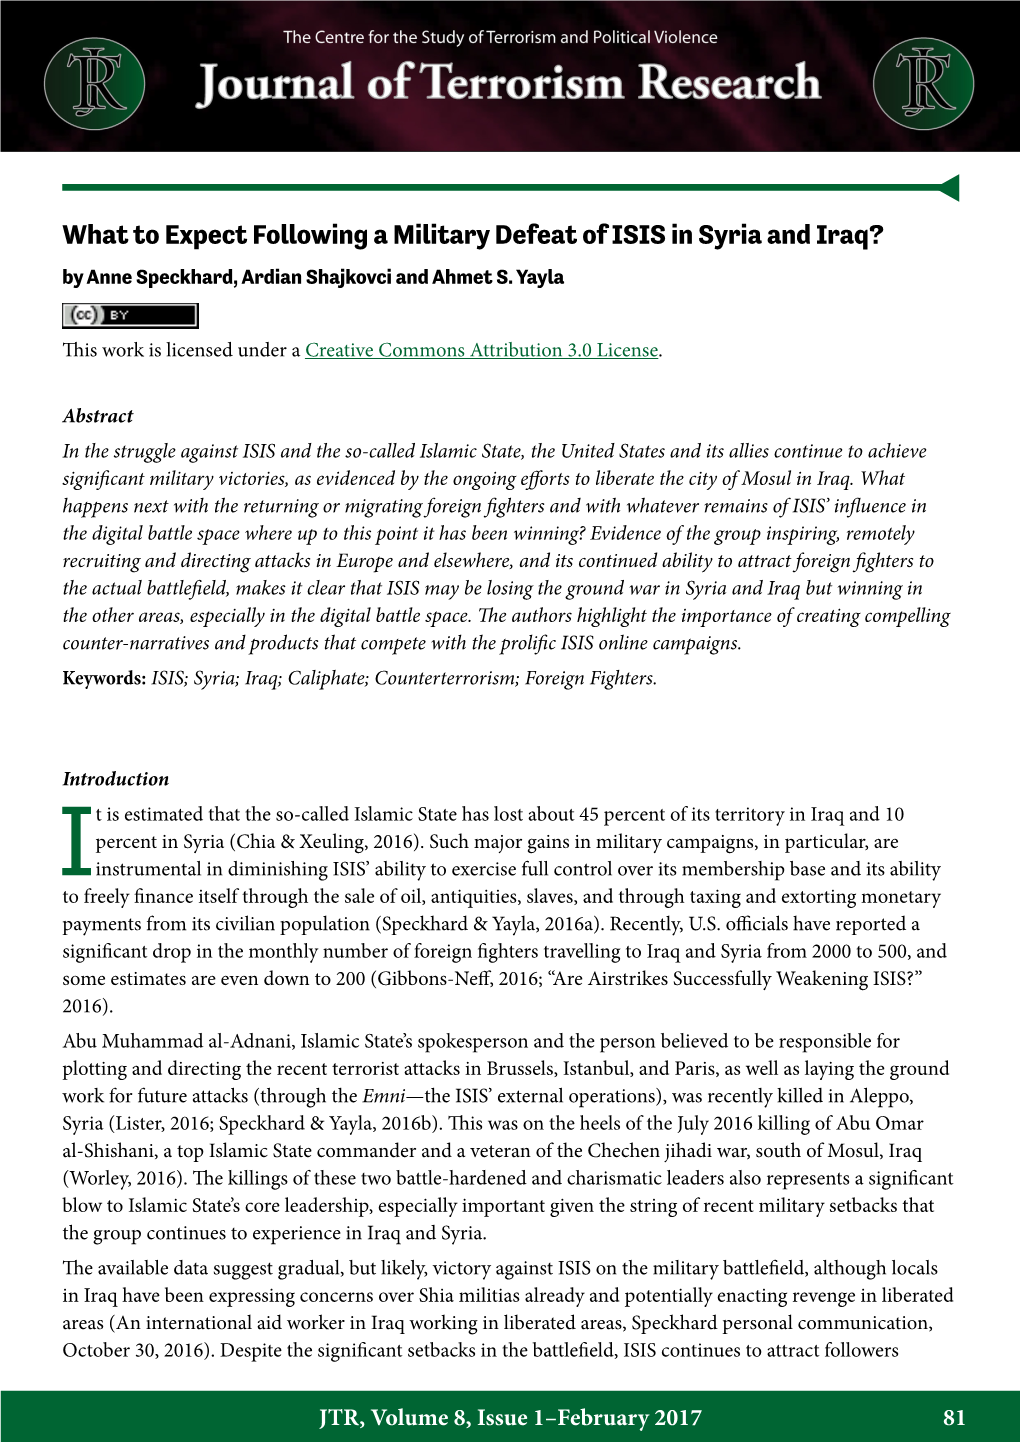 What to Expect Following a Military Defeat of ISIS in Syria and Iraq? by Anne Speckhard, Ardian Shajkovci and Ahmet S